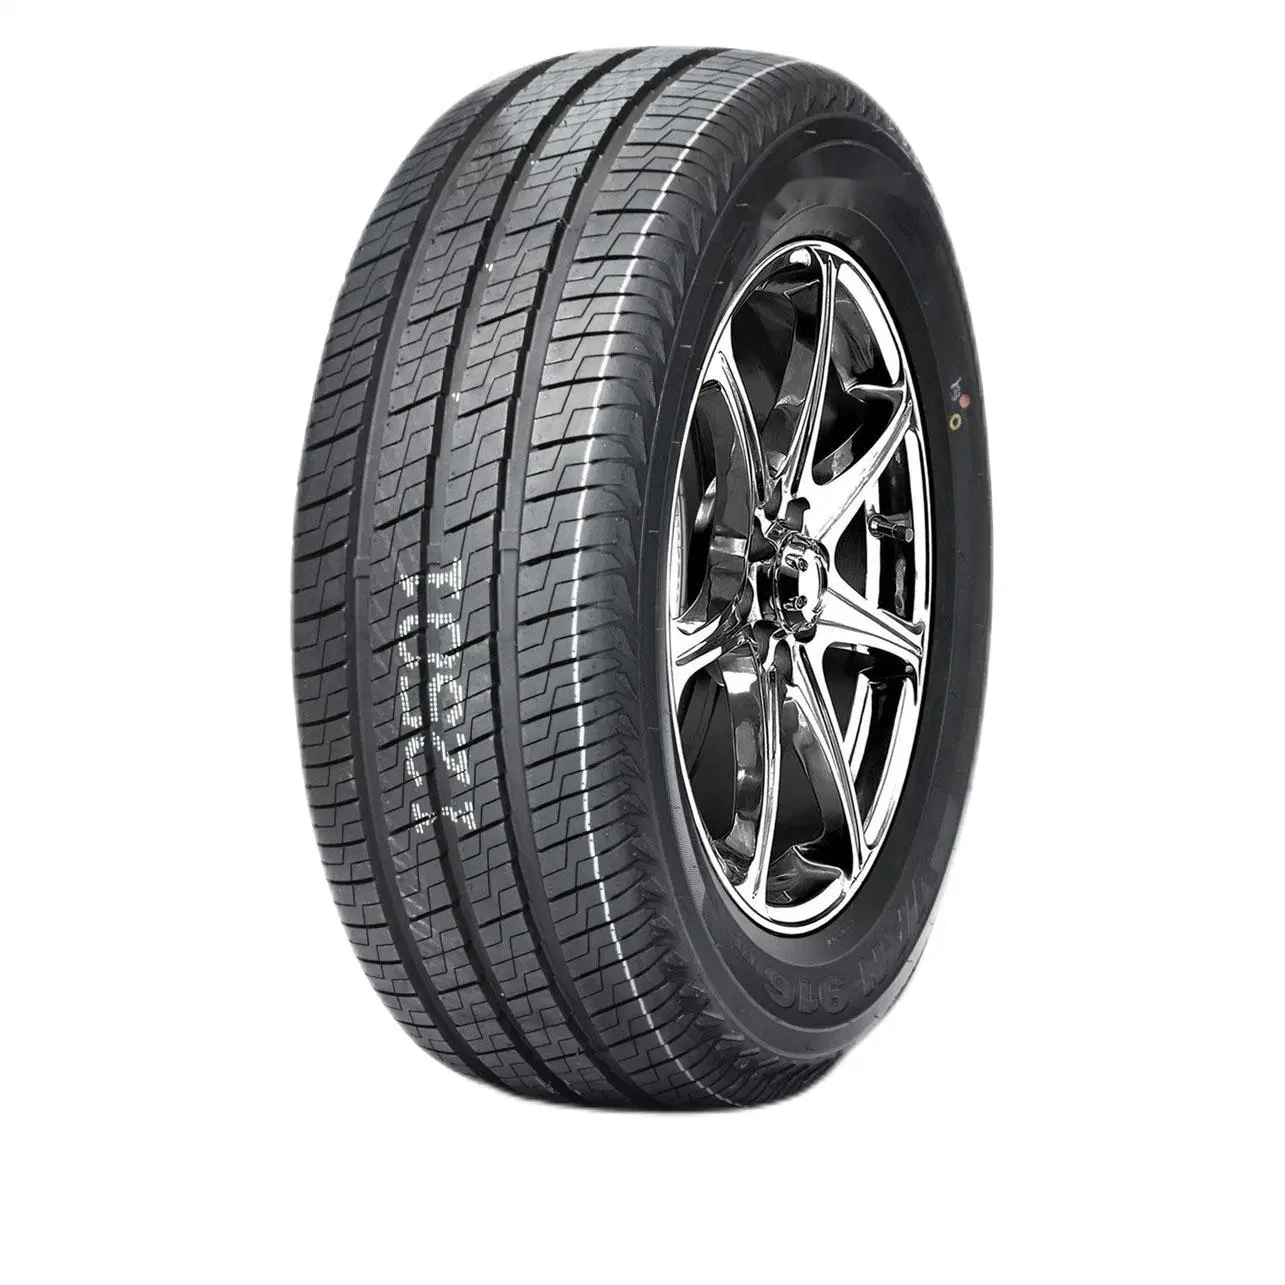 PCR PASSENGER CAR LTR RADIAL Tires for  LT225/75R16 115/112S 35*12.50R18LT  SUV TRUCK AND BUS FACTORY SUPPLY TOP BRAND COMPETITIVE PRICES NEW SEMI TRUCK TYRES